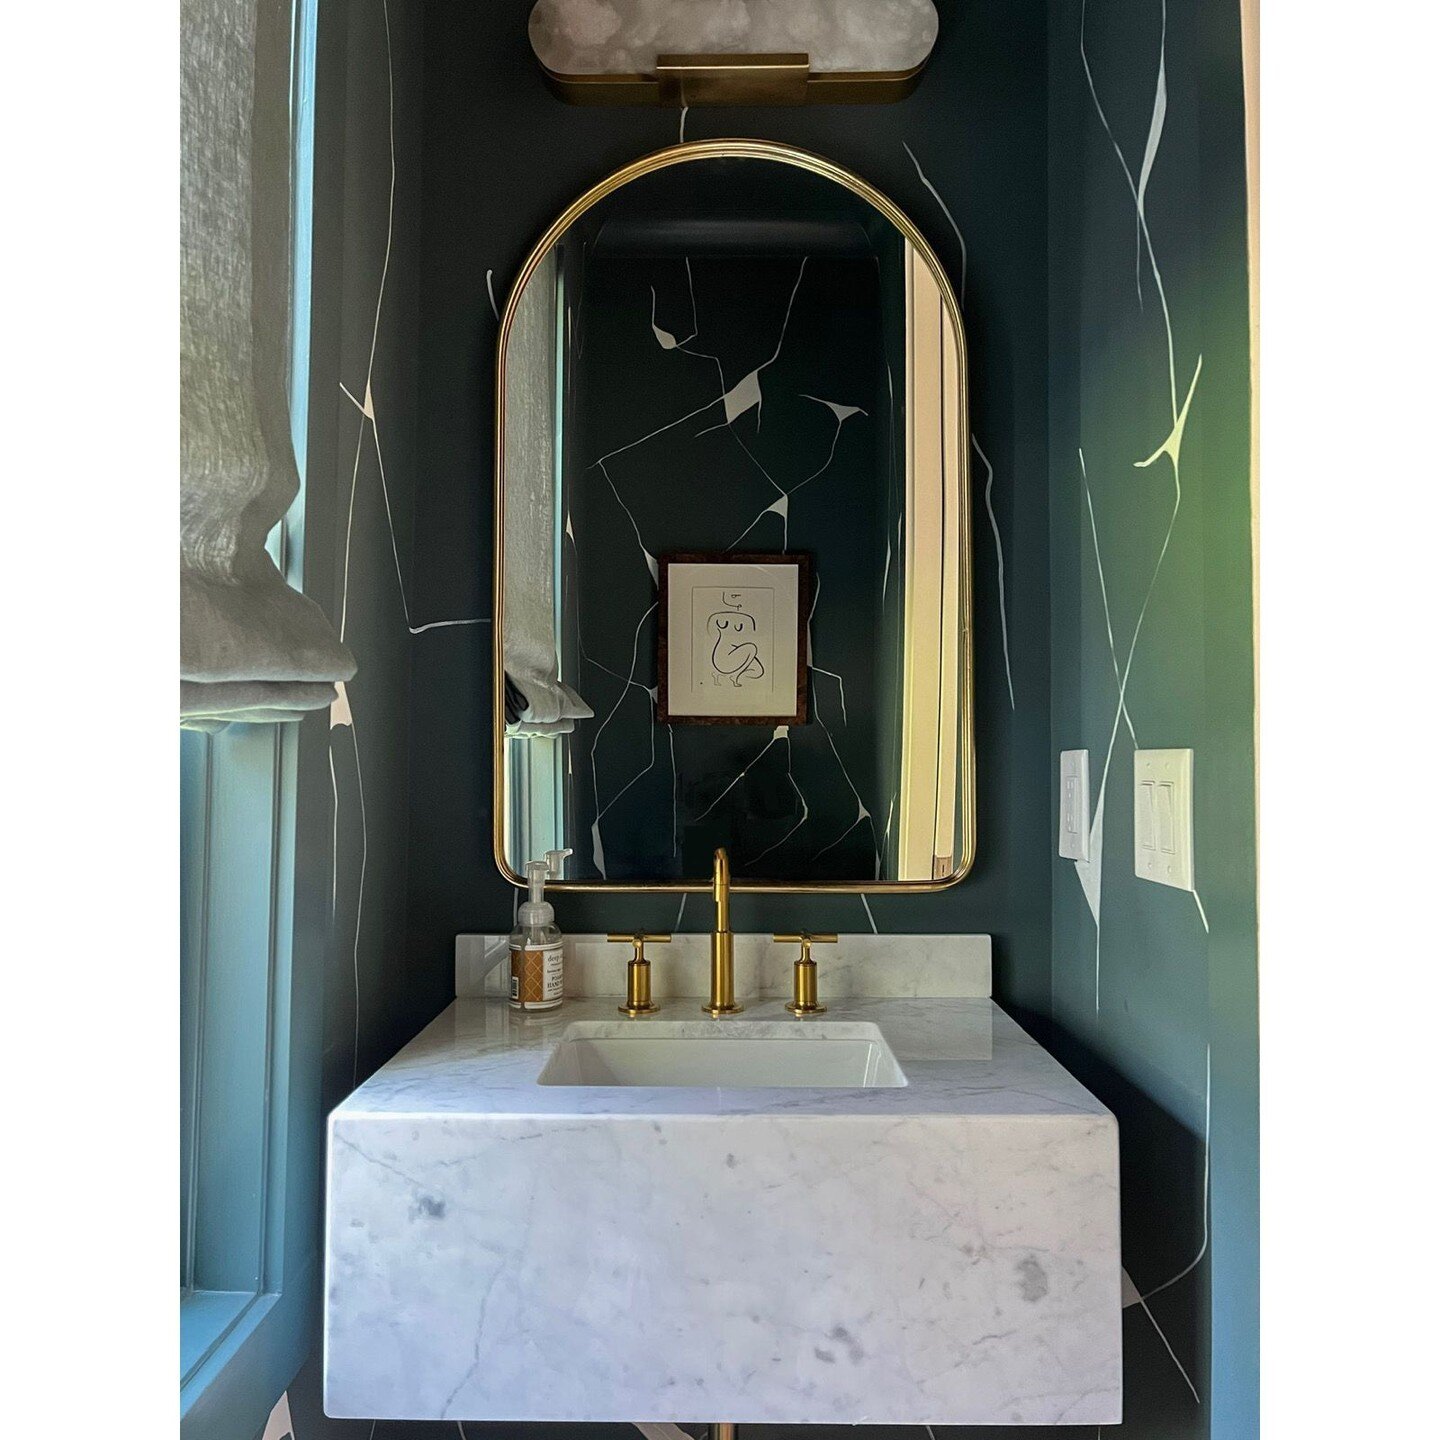 It may be safe to say that designing statement powder baths are my kryptonite. Let's here it for this never shared before one! 👏👏👏

.
.
.
.
.
#interiordesign #charlestoninteriors #charlestoninteriordesign #beccajonesinteriors #sodomino #cljsquad  